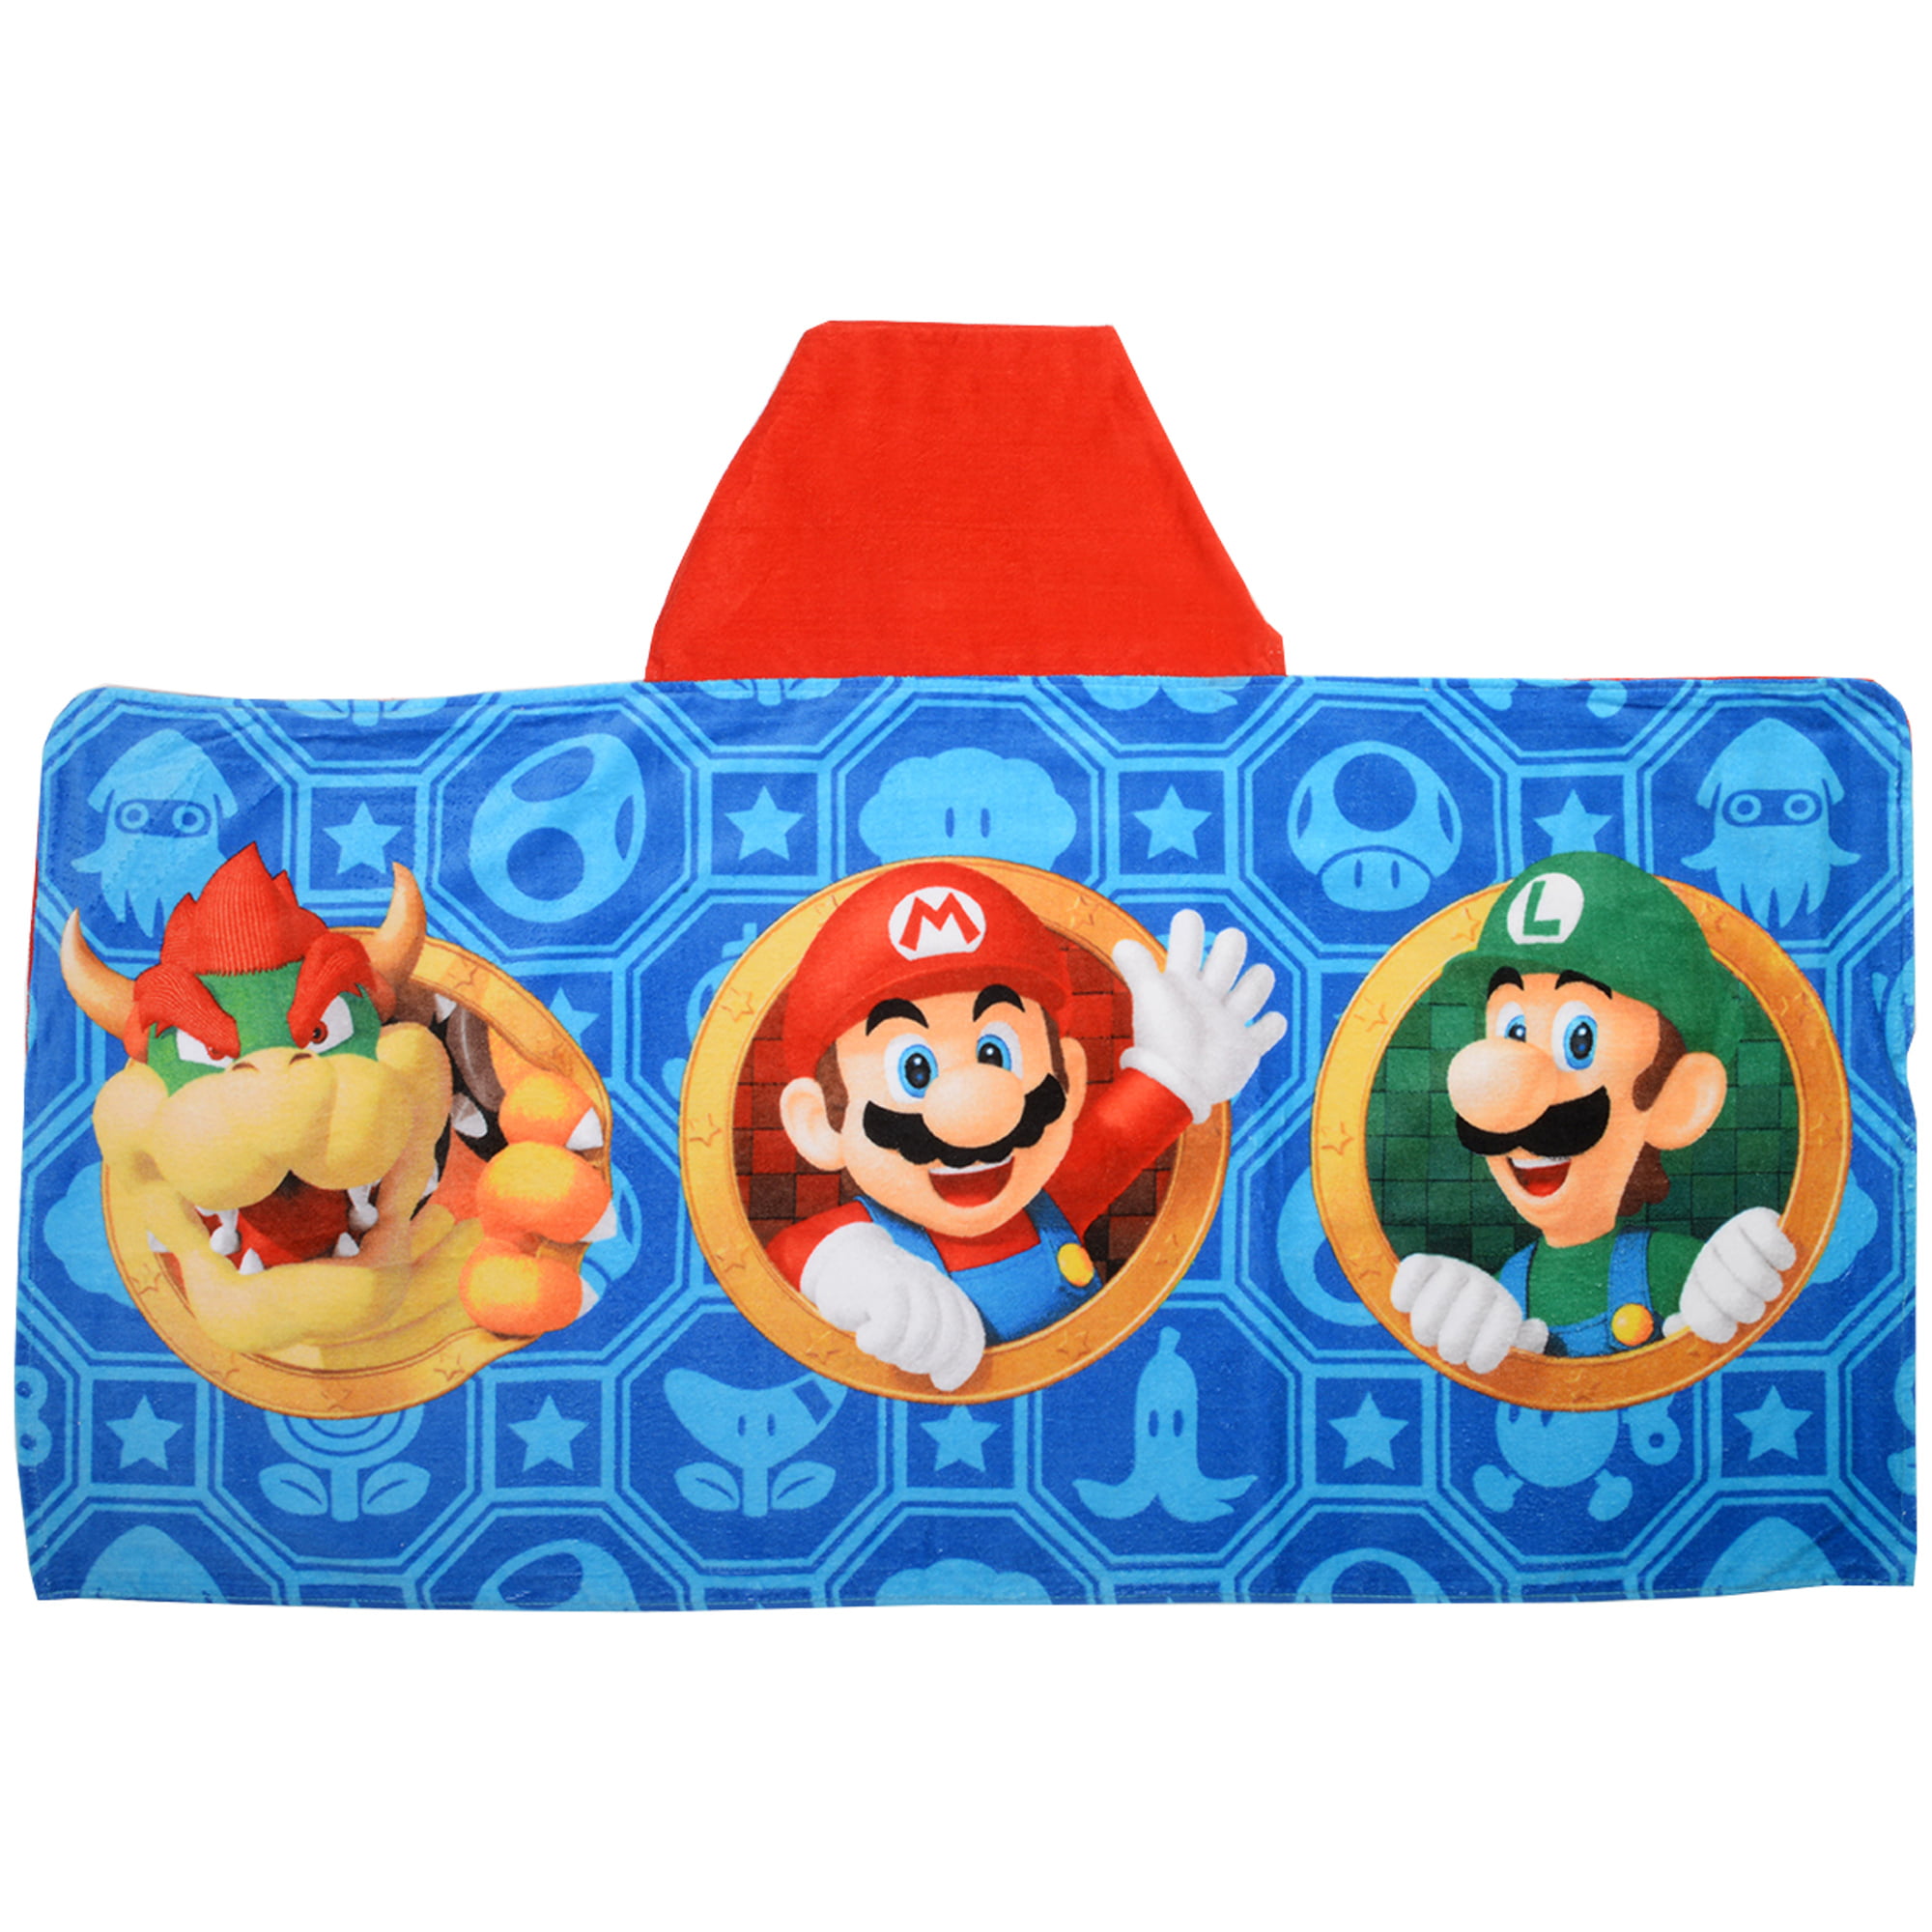 Beach or Swimming Pool Red Plumber Brother Mario Hooded Towel Kid/'s Hooded Towel Character Inspired Mario Towel for Bath